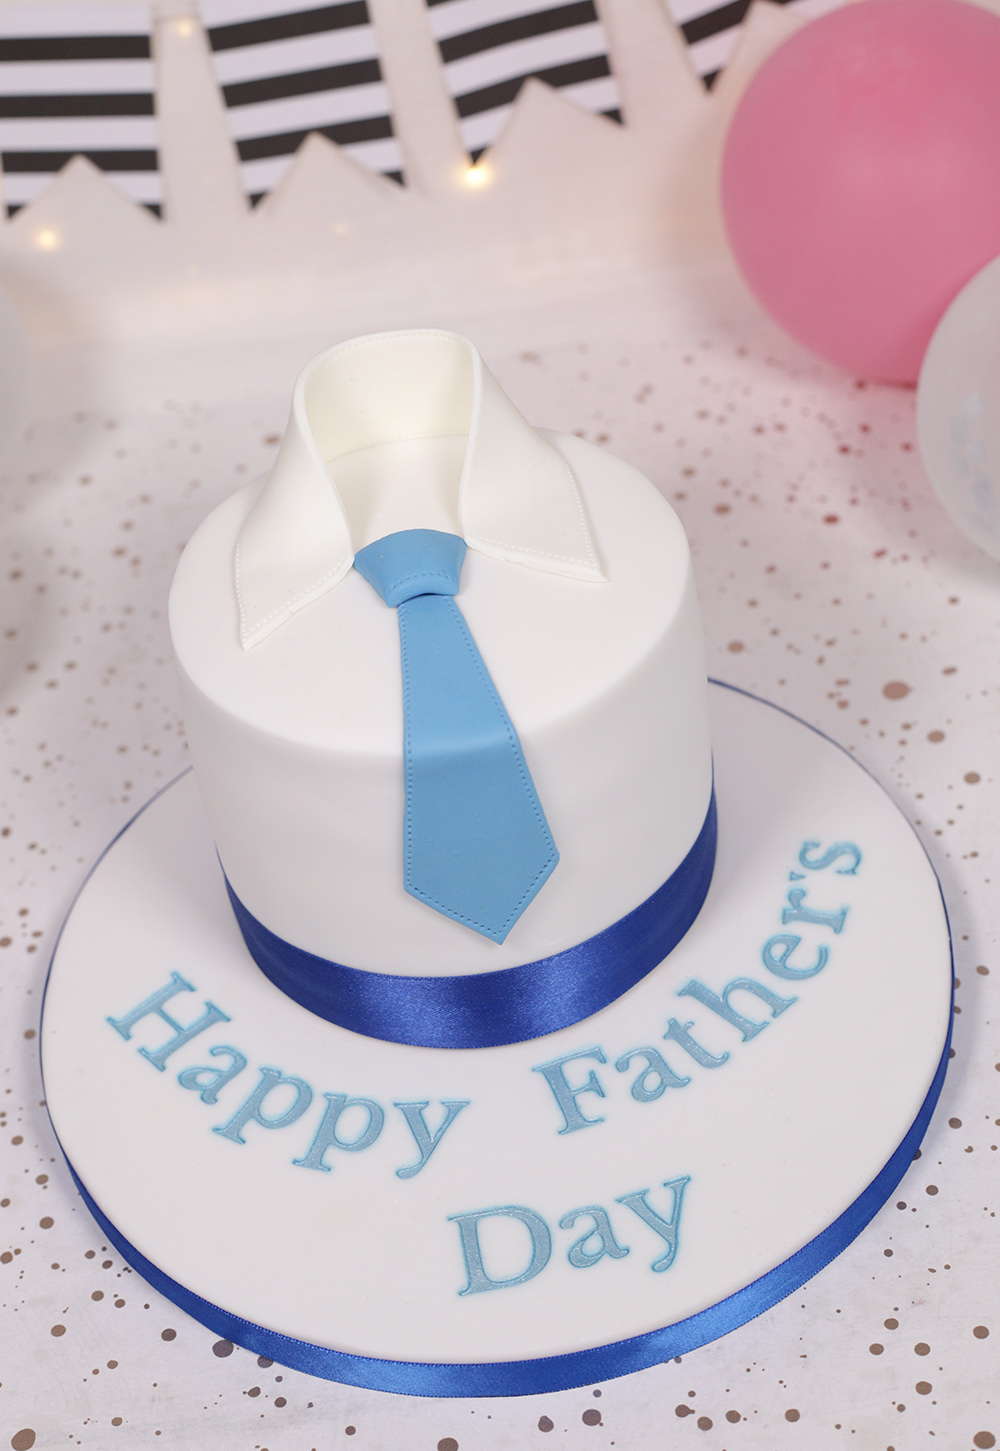 Delightful Father's Day Cakes - Designs & Ideas!